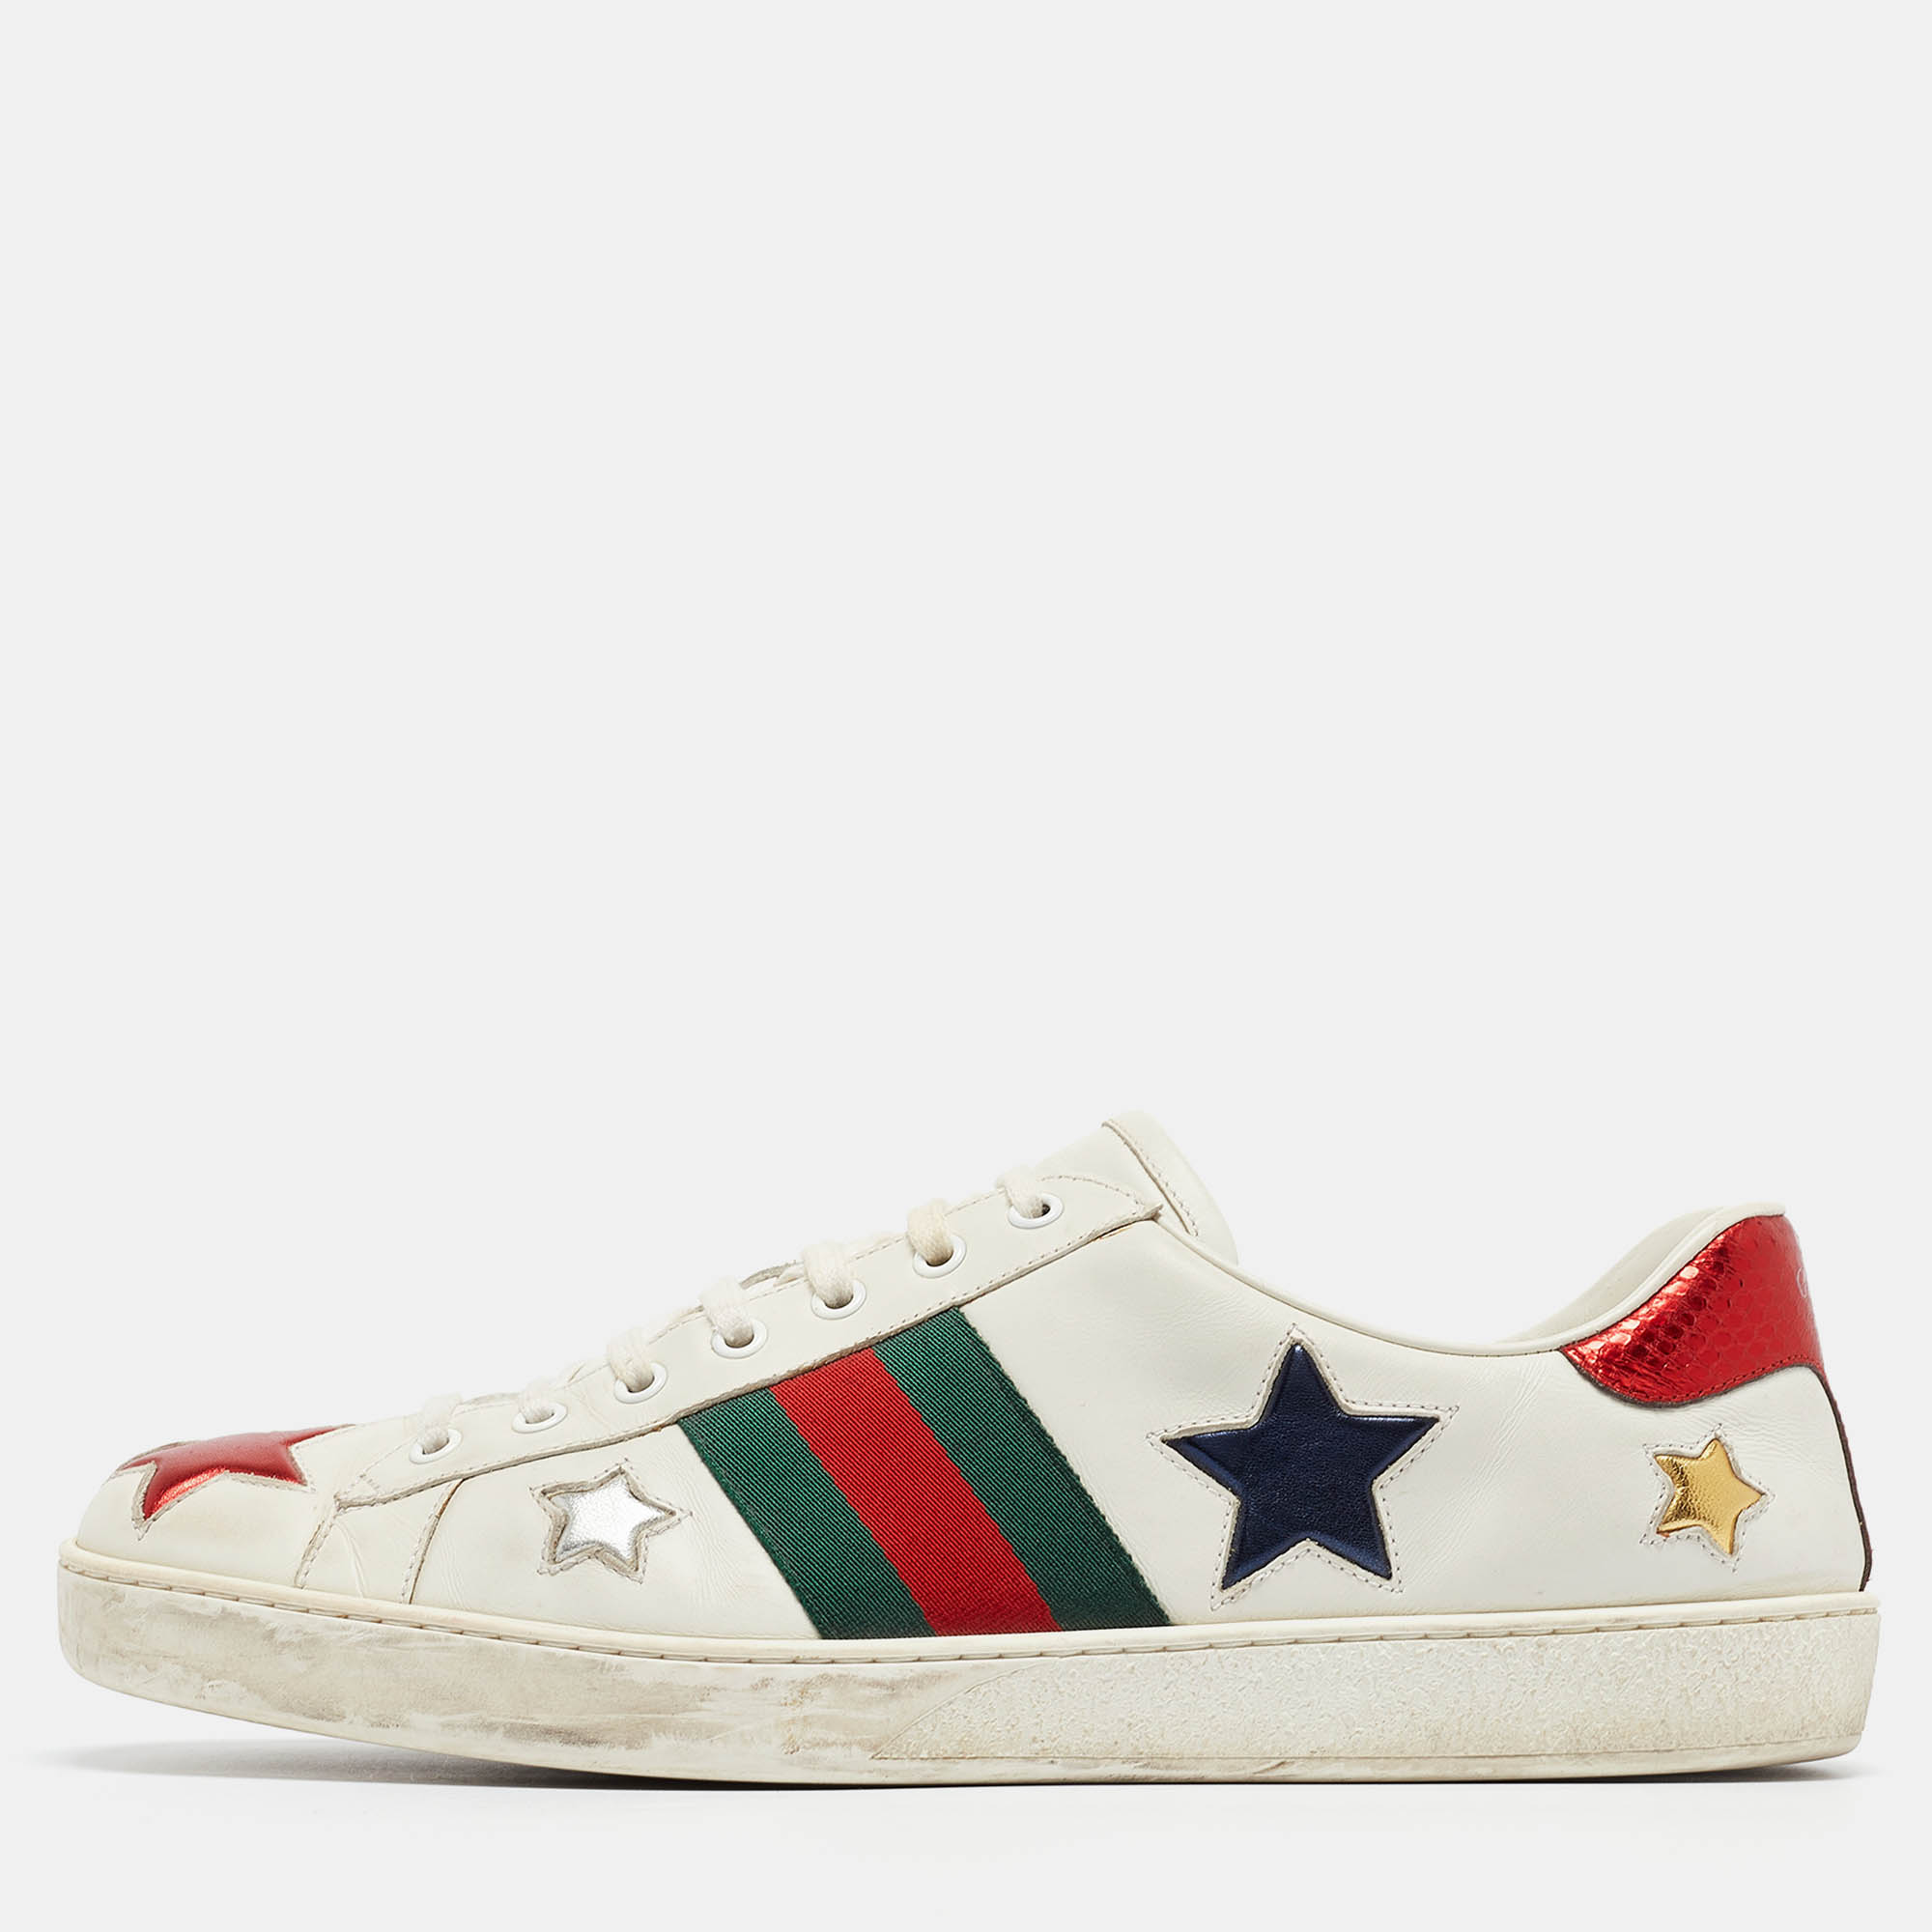 Gucci white leather star ace low top sneakers size 45